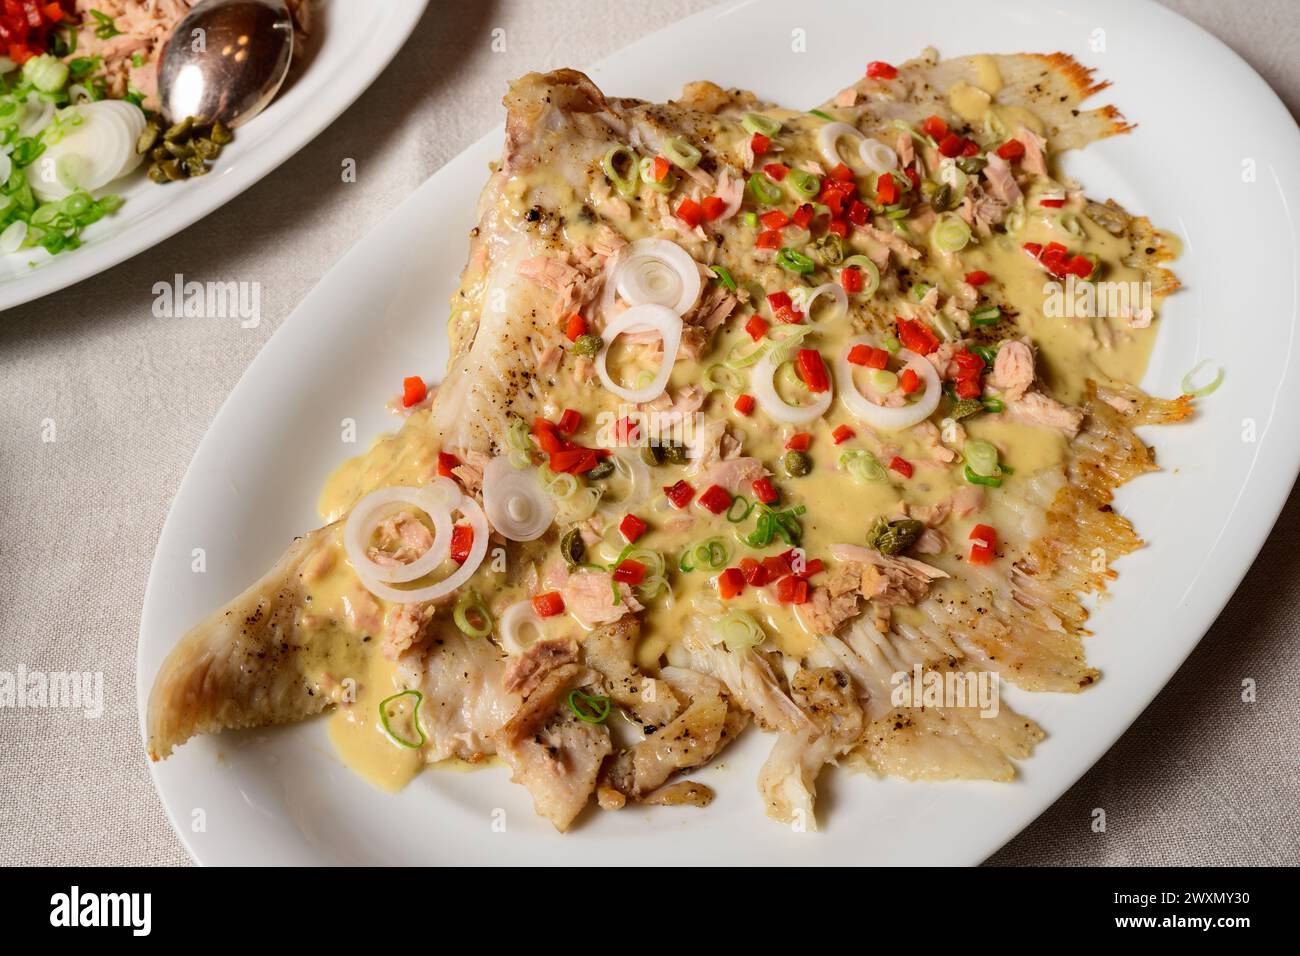 Skate Wing or Ray Wing Prepared Whole with Tuna Mayonnaise Sauce and Red Bell Pepper Stock Photo